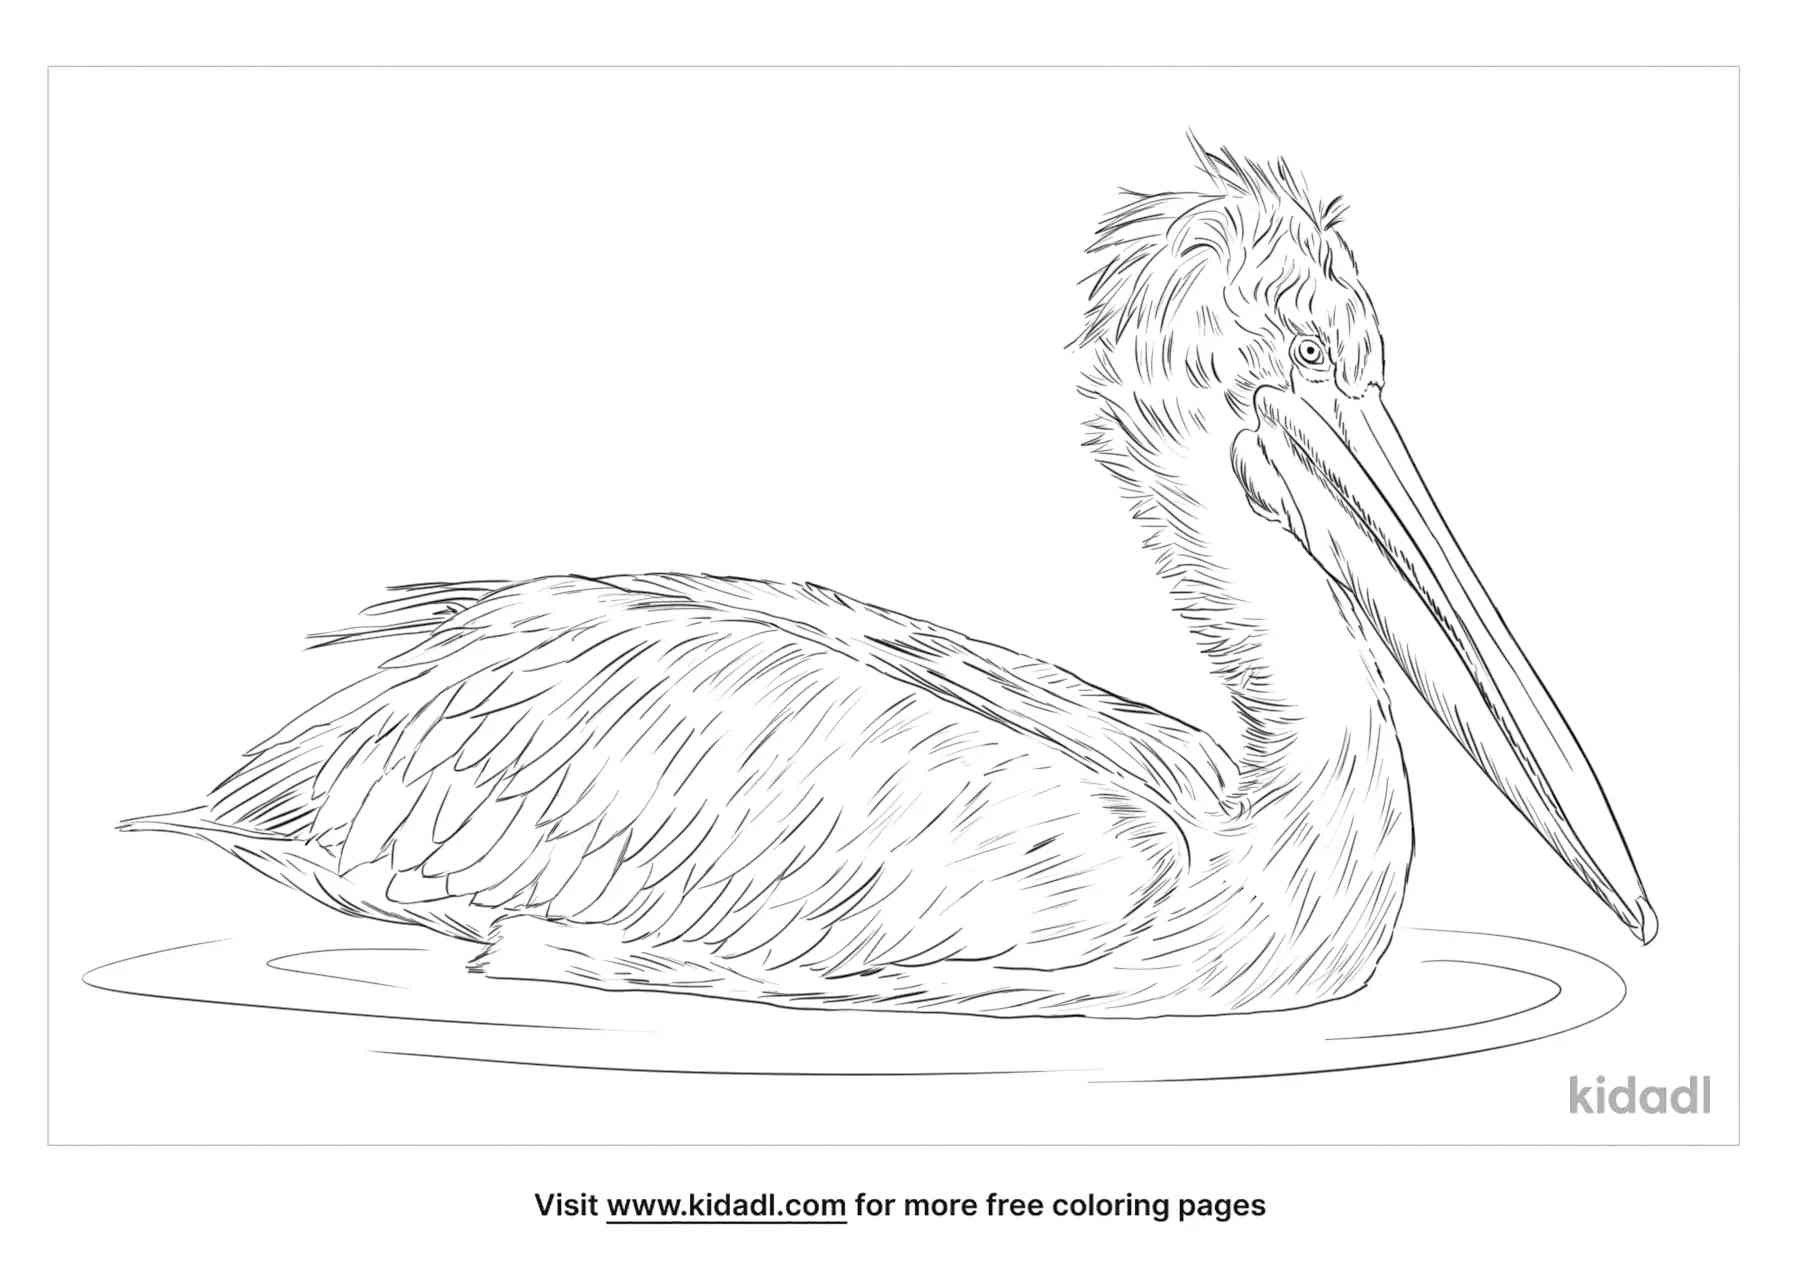 Dalmatian Pelican sketch and coloring page for kids.